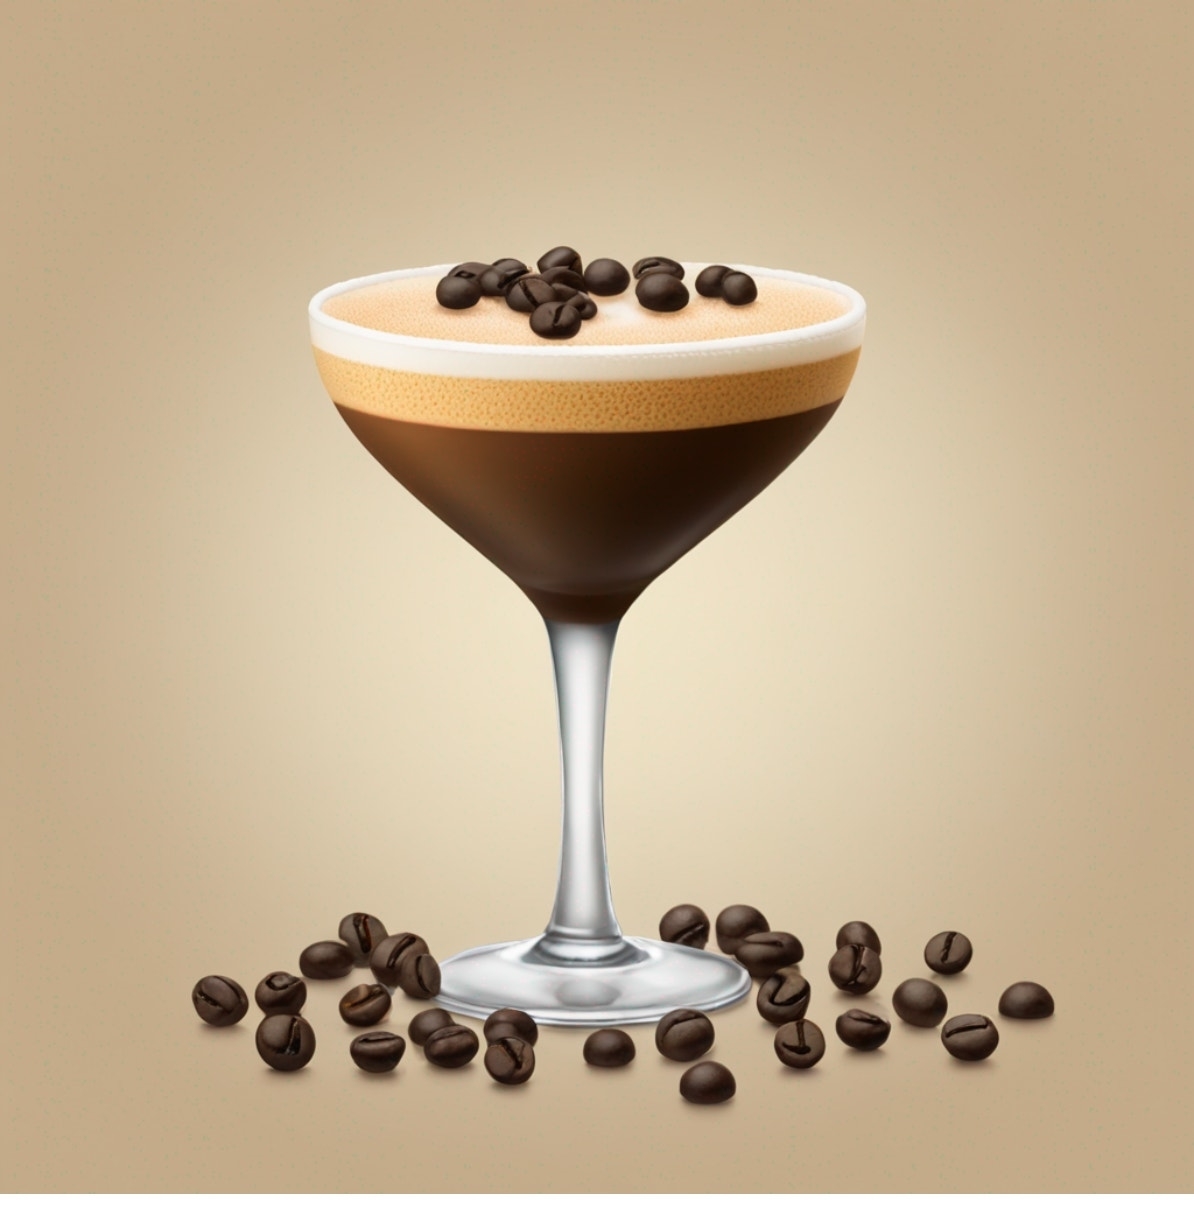 Espresso martini with coffee beans scattered around the base of the glass